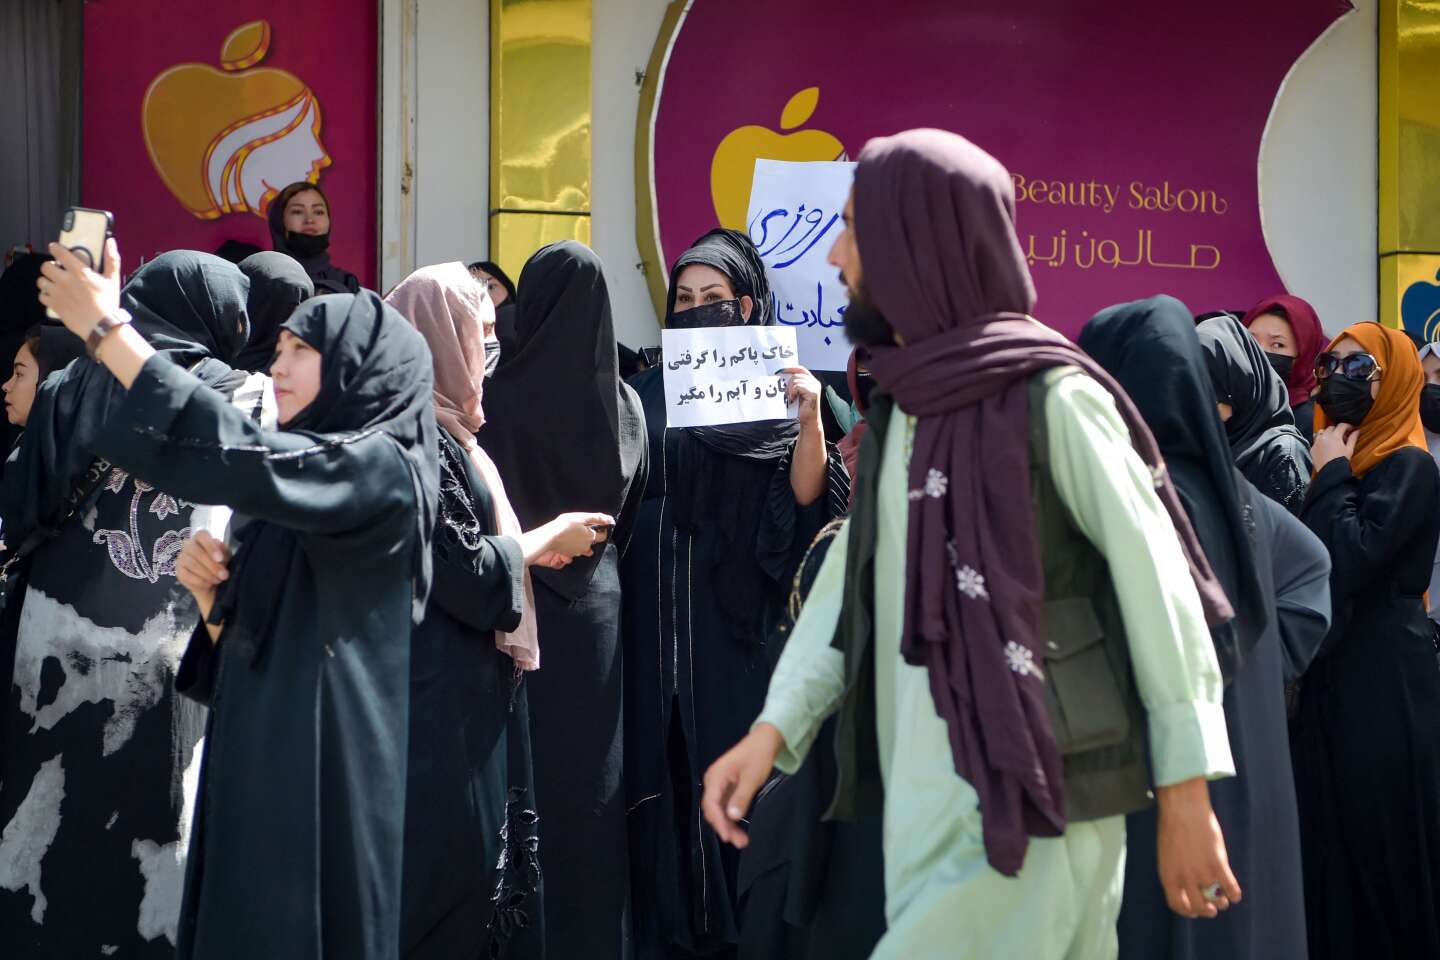 Women protest in Kabul against the closure of beauty salons